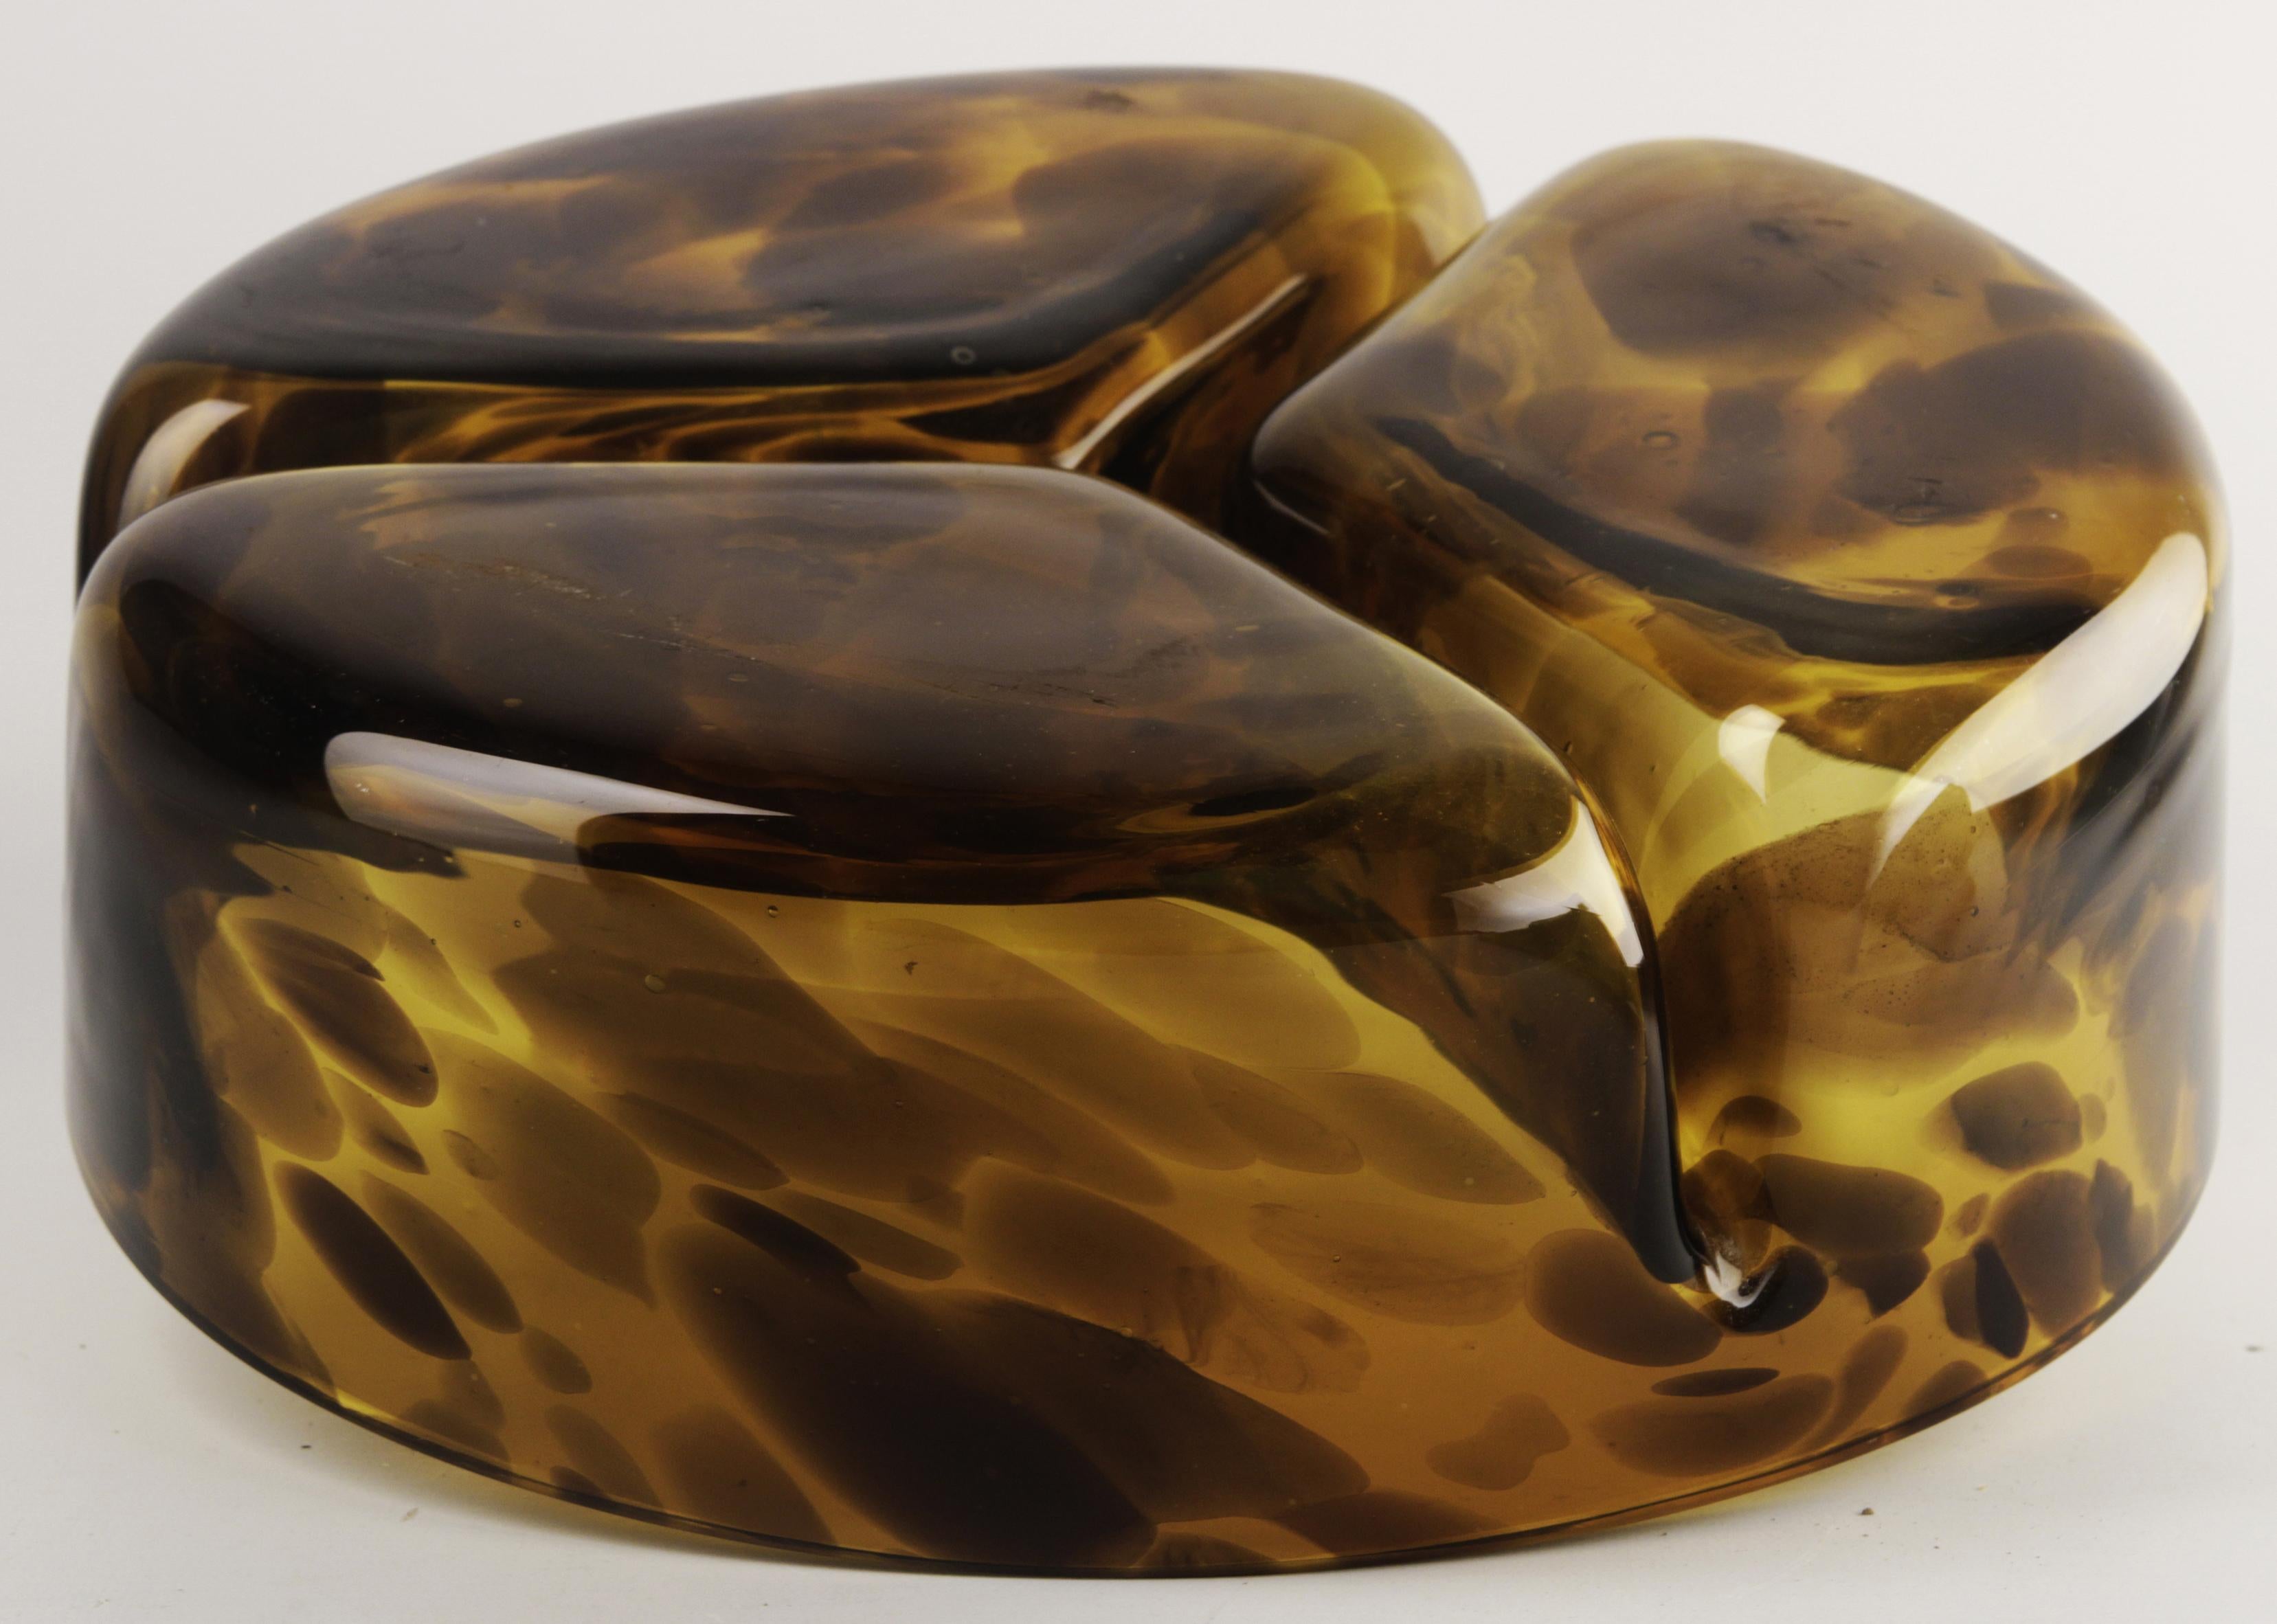 Mid-20th C. Modern Glass Centerpiece Salad Bowl by Argentine Designer A. Churba In Good Condition For Sale In North Miami, FL